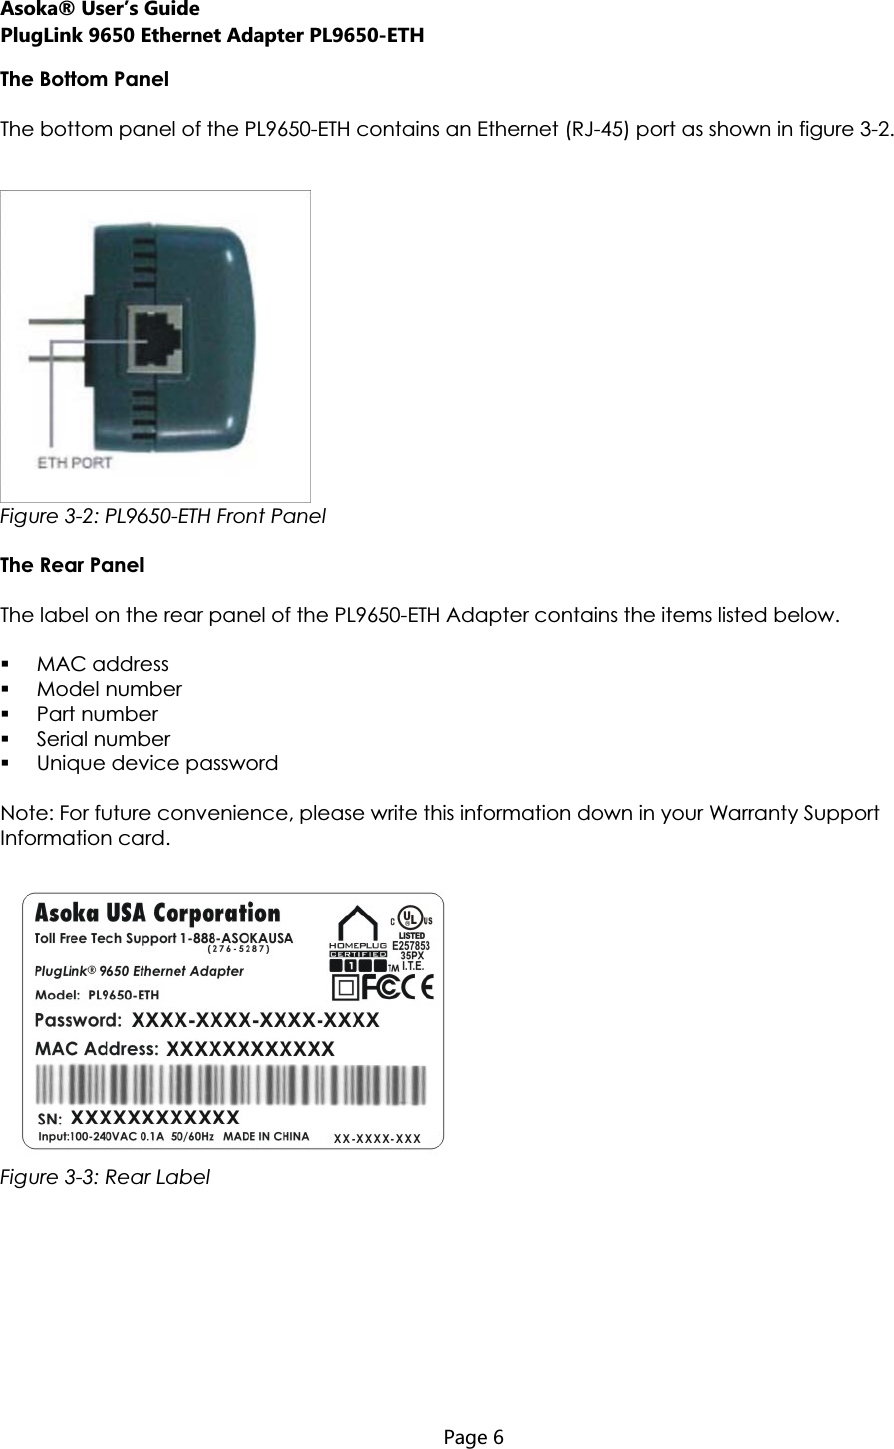 Asoka® User’s Guide PlugLink 9650 Ethernet Adapter PL9650-ETH  Page 6  The Bottom Panel The bottom panel of the PL9650-ETH contains an Ethernet (RJ-45) port as shown in figure 3-2. Figure 3-2: PL9650-ETH Front PanelThe Rear Panel  The label on the rear panel of the PL9650-ETH Adapter contains the items listed below. MAC address Model number Part number Serial number Unique device password Note: For future convenience, please write this information down in your Warranty Support Information card. Figure 3-3: Rear Label 